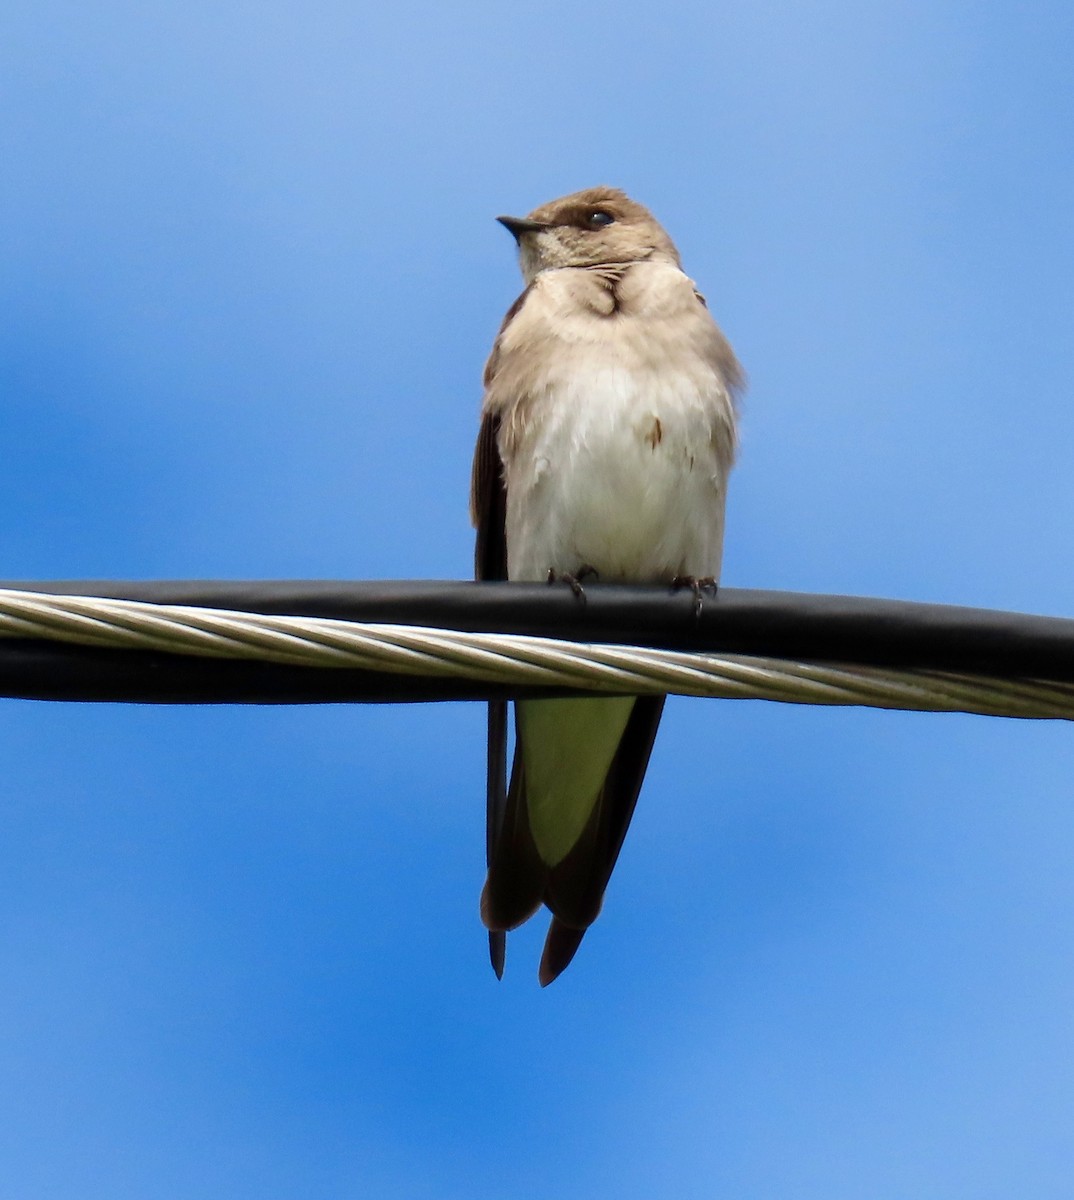 Northern Rough-winged Swallow - Petra Clayton